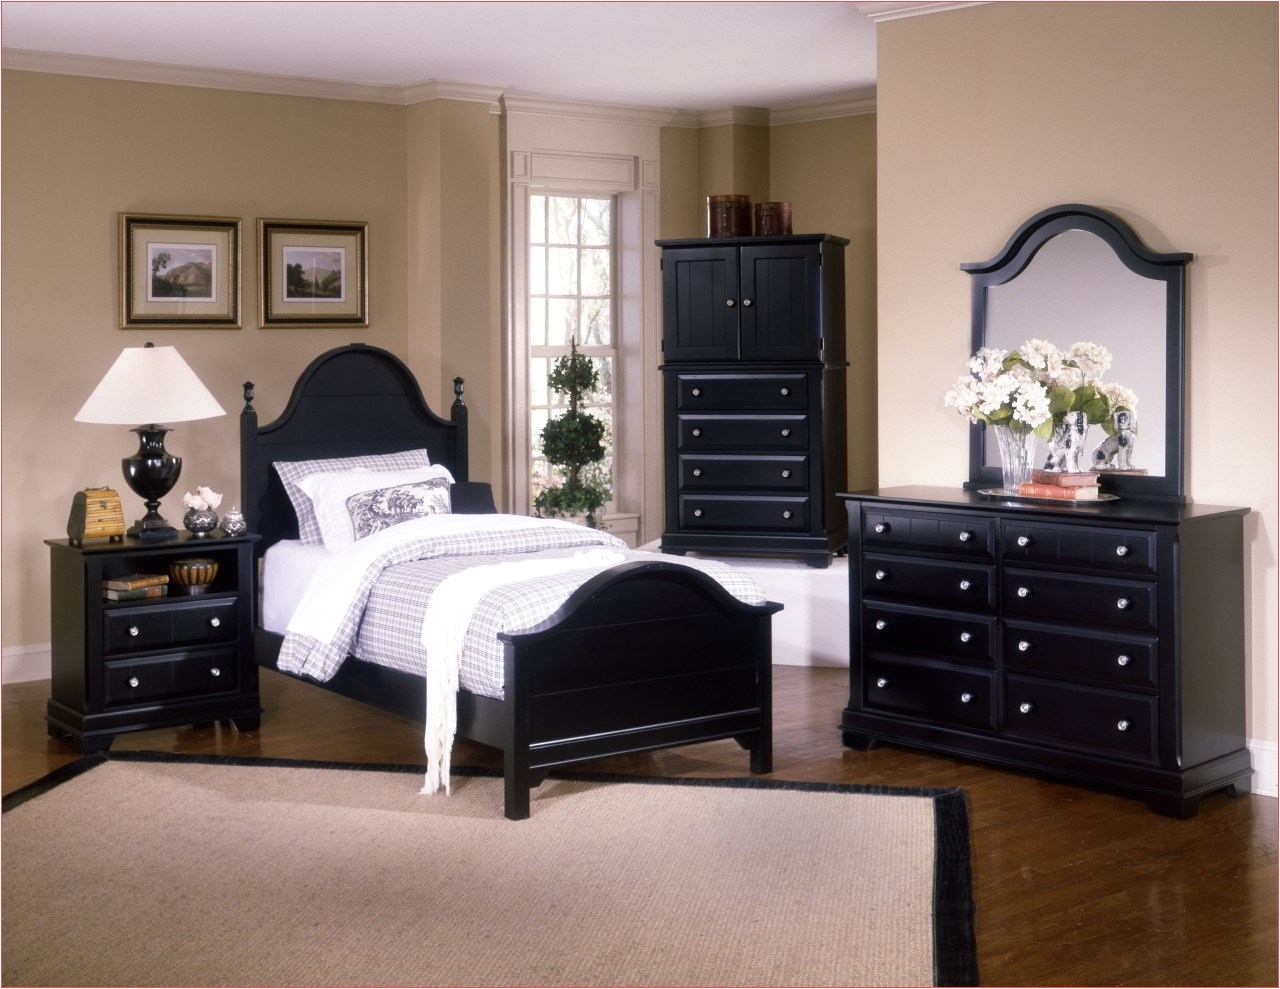 bed and bedroom furniture sets luxury renovate your livingroom decoration with cool great twin bedroom of